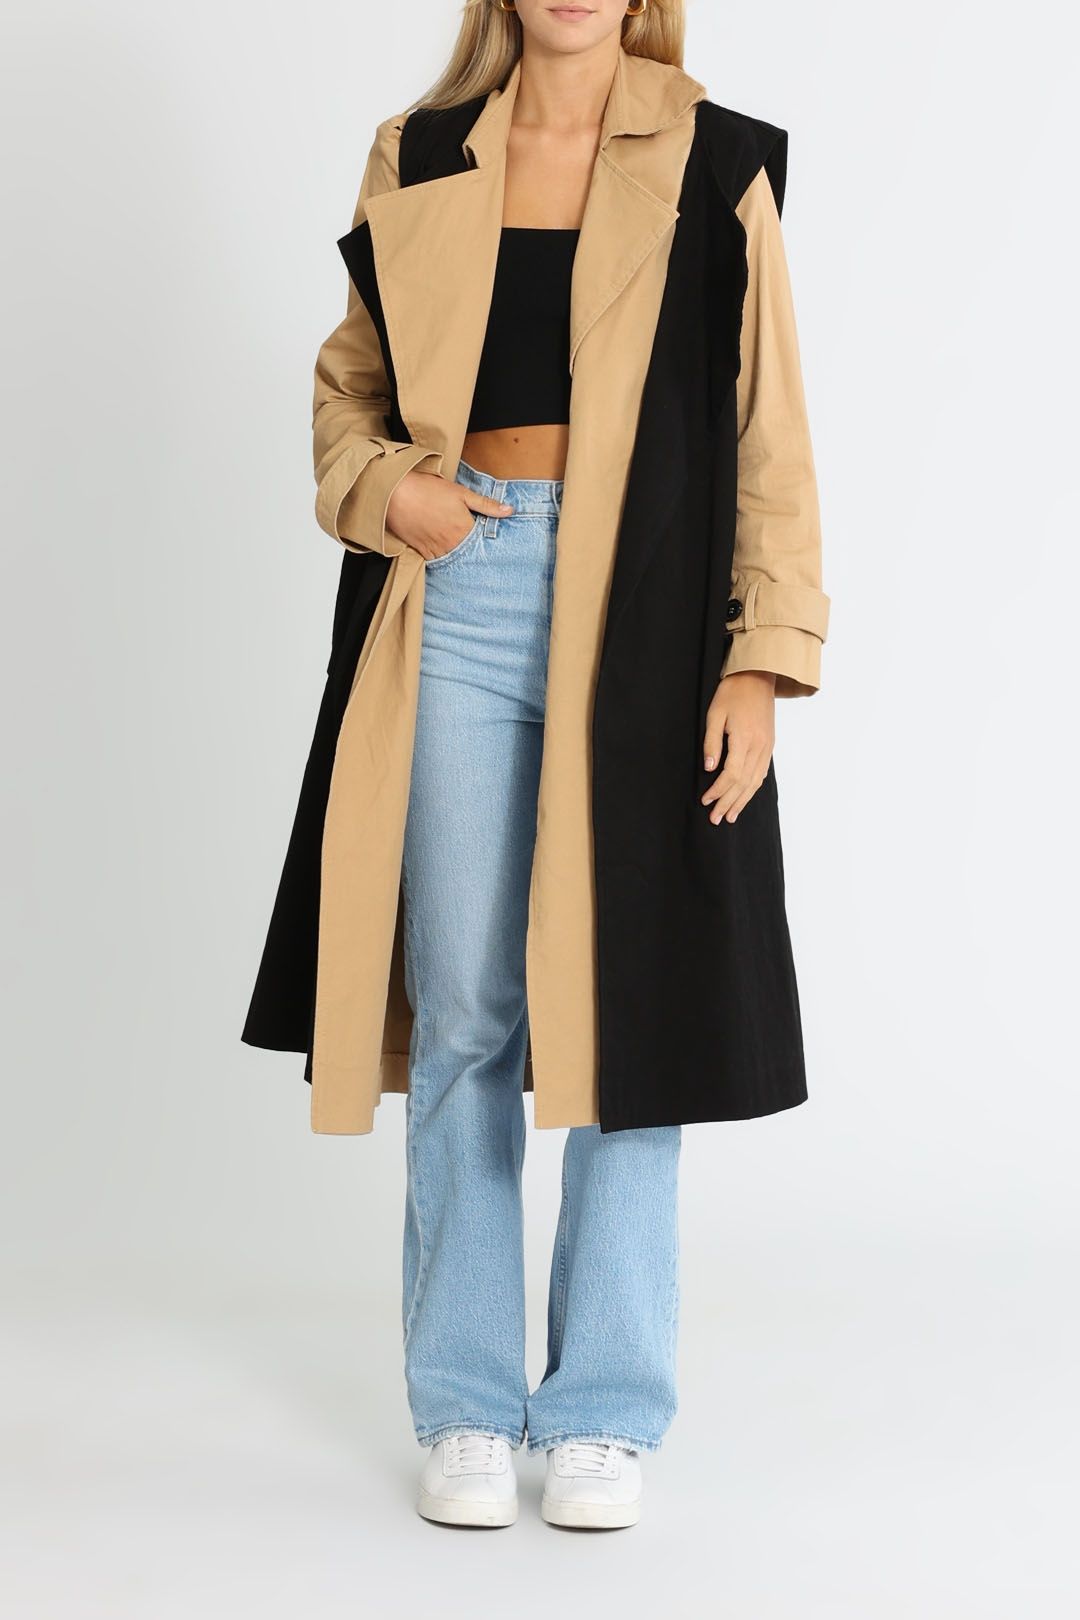 St Agni Layered Trench - Beige